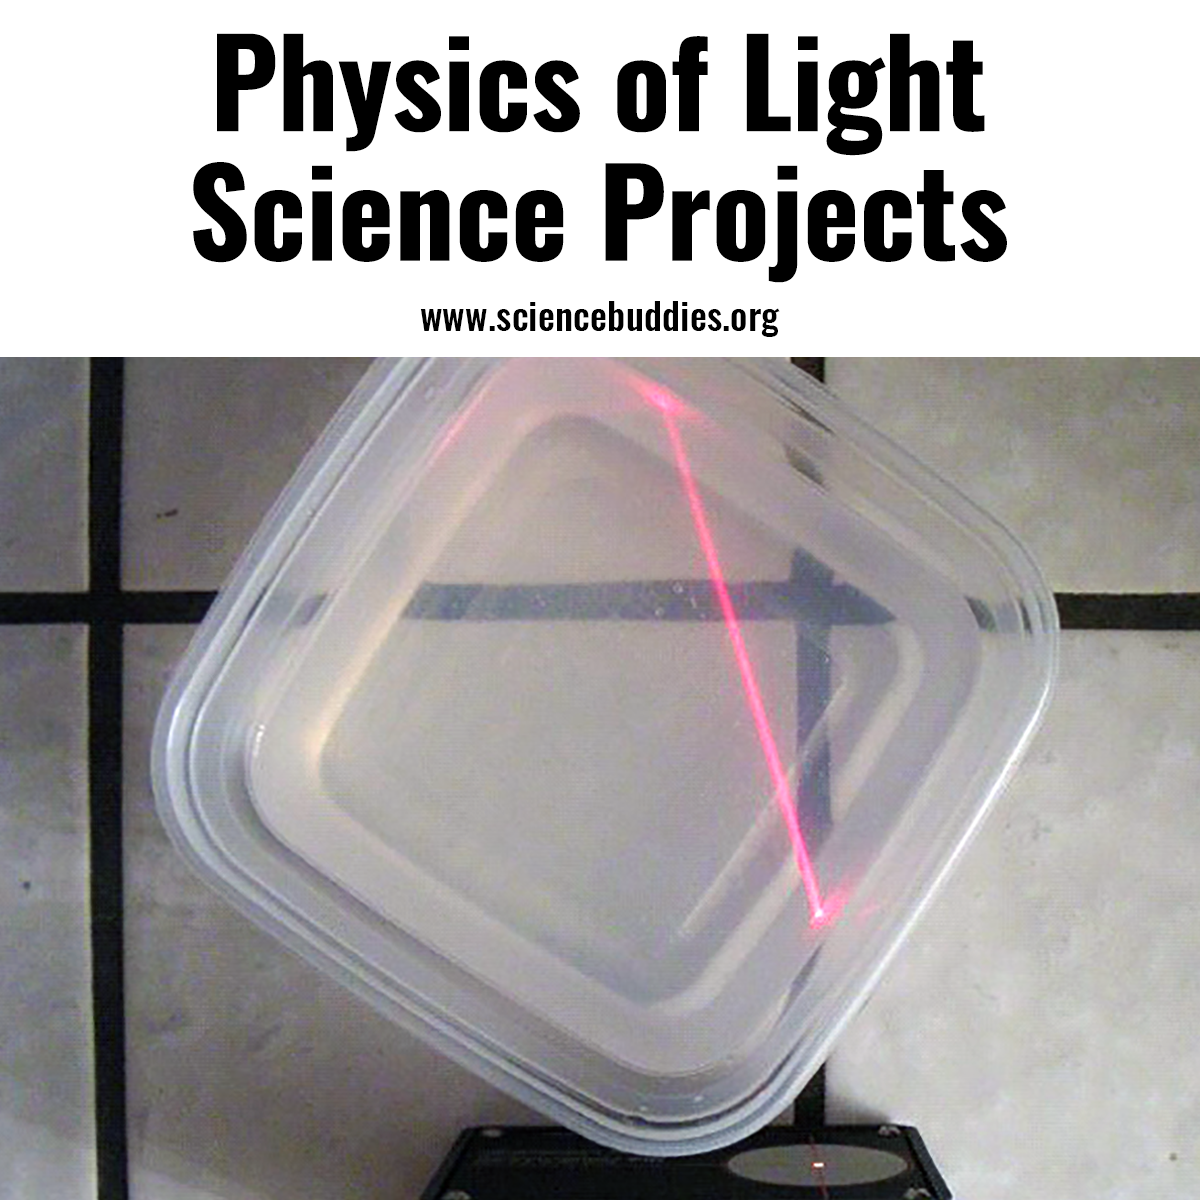 Visible Light Projects and Activities, including speed of light science - part of Visible Light Collection at Science Buddies